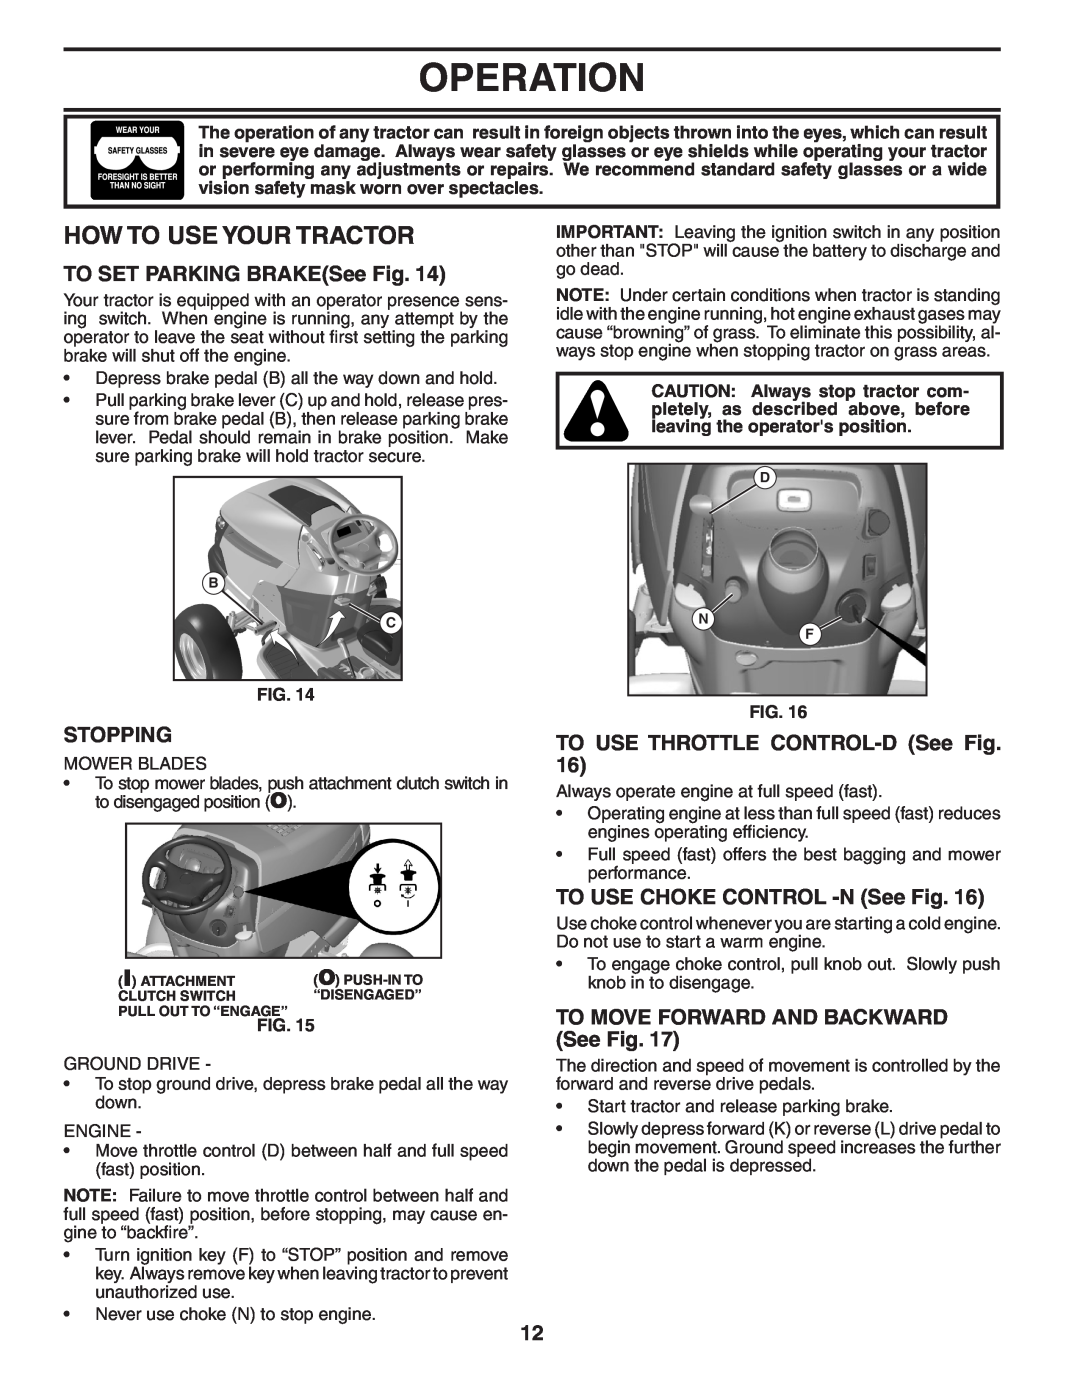 Poulan 406255 How To Use Your Tractor, TO SET PARKING BRAKESee Fig, Stopping, TO USE THROTTLE CONTROL-D See Fig, Operation 